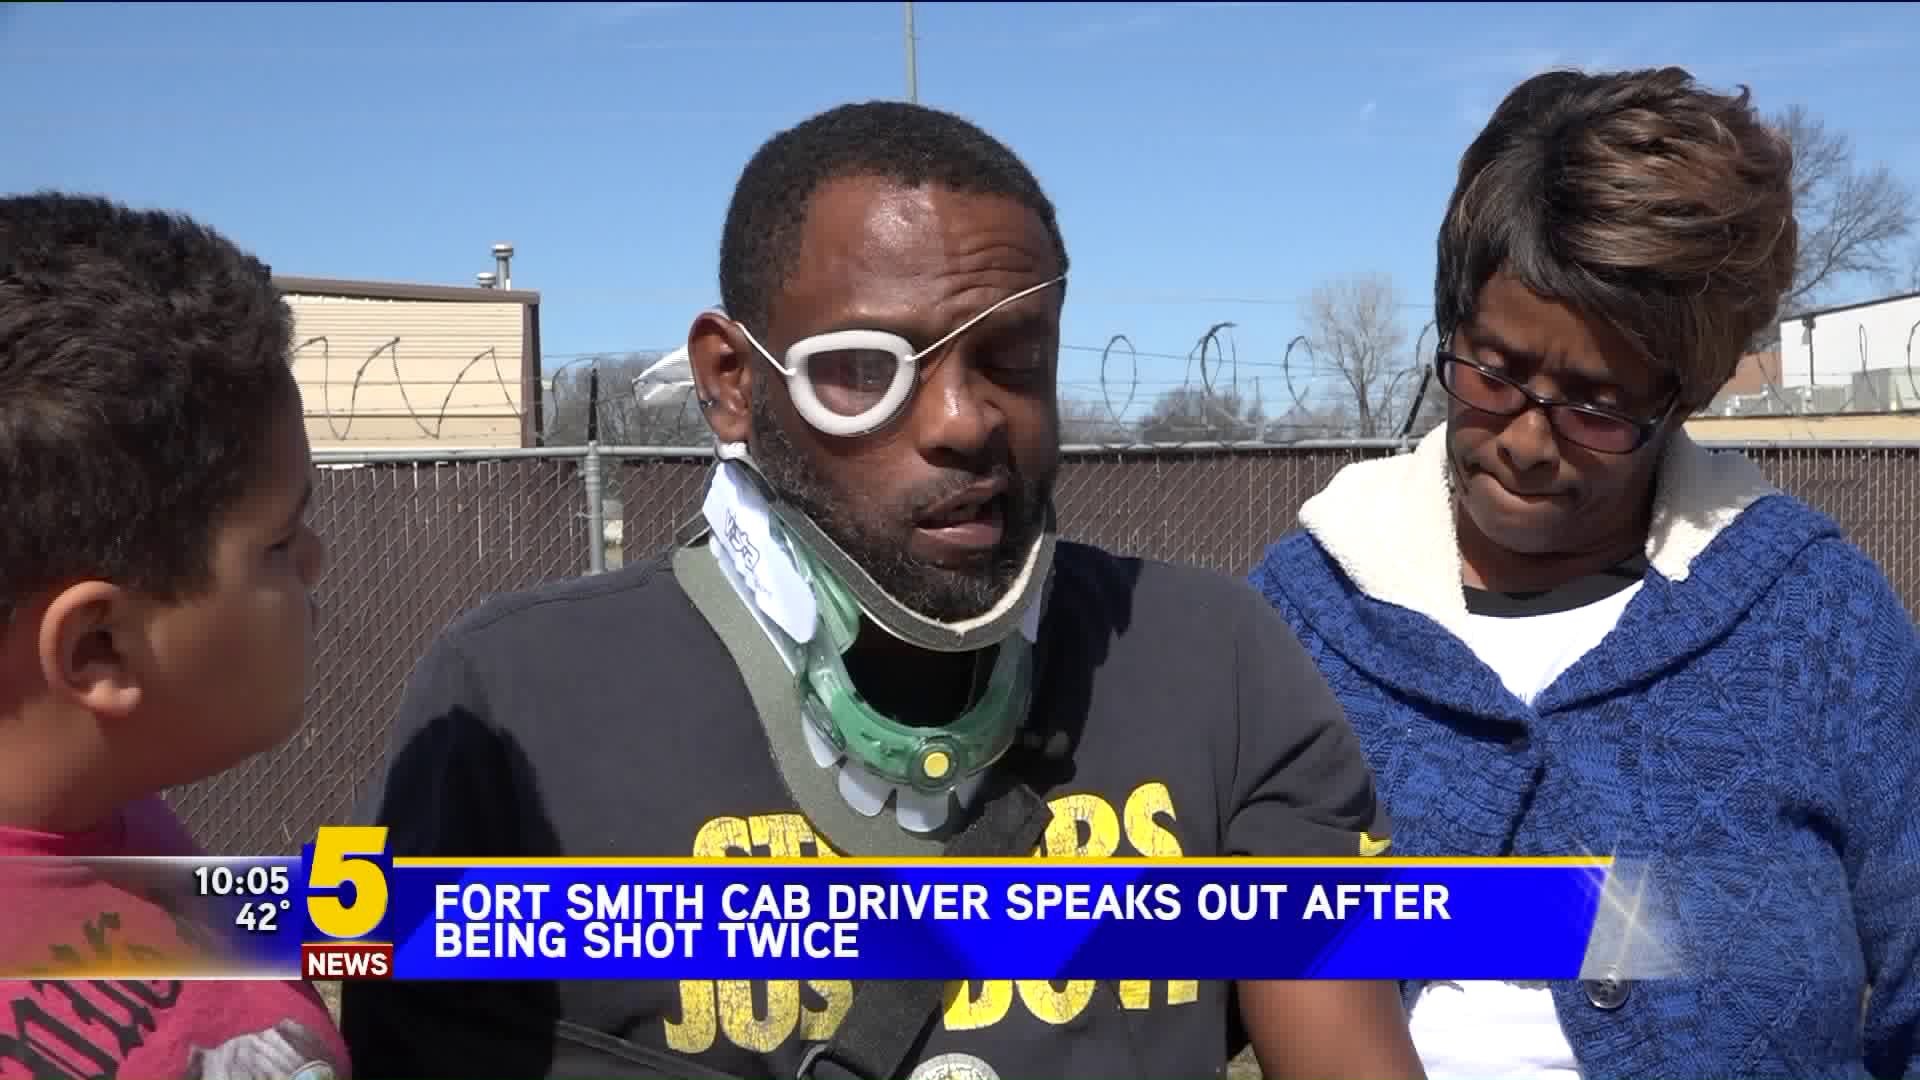 Fort Smith Cab Driver Speaks About Being Shot Twice While On Duty